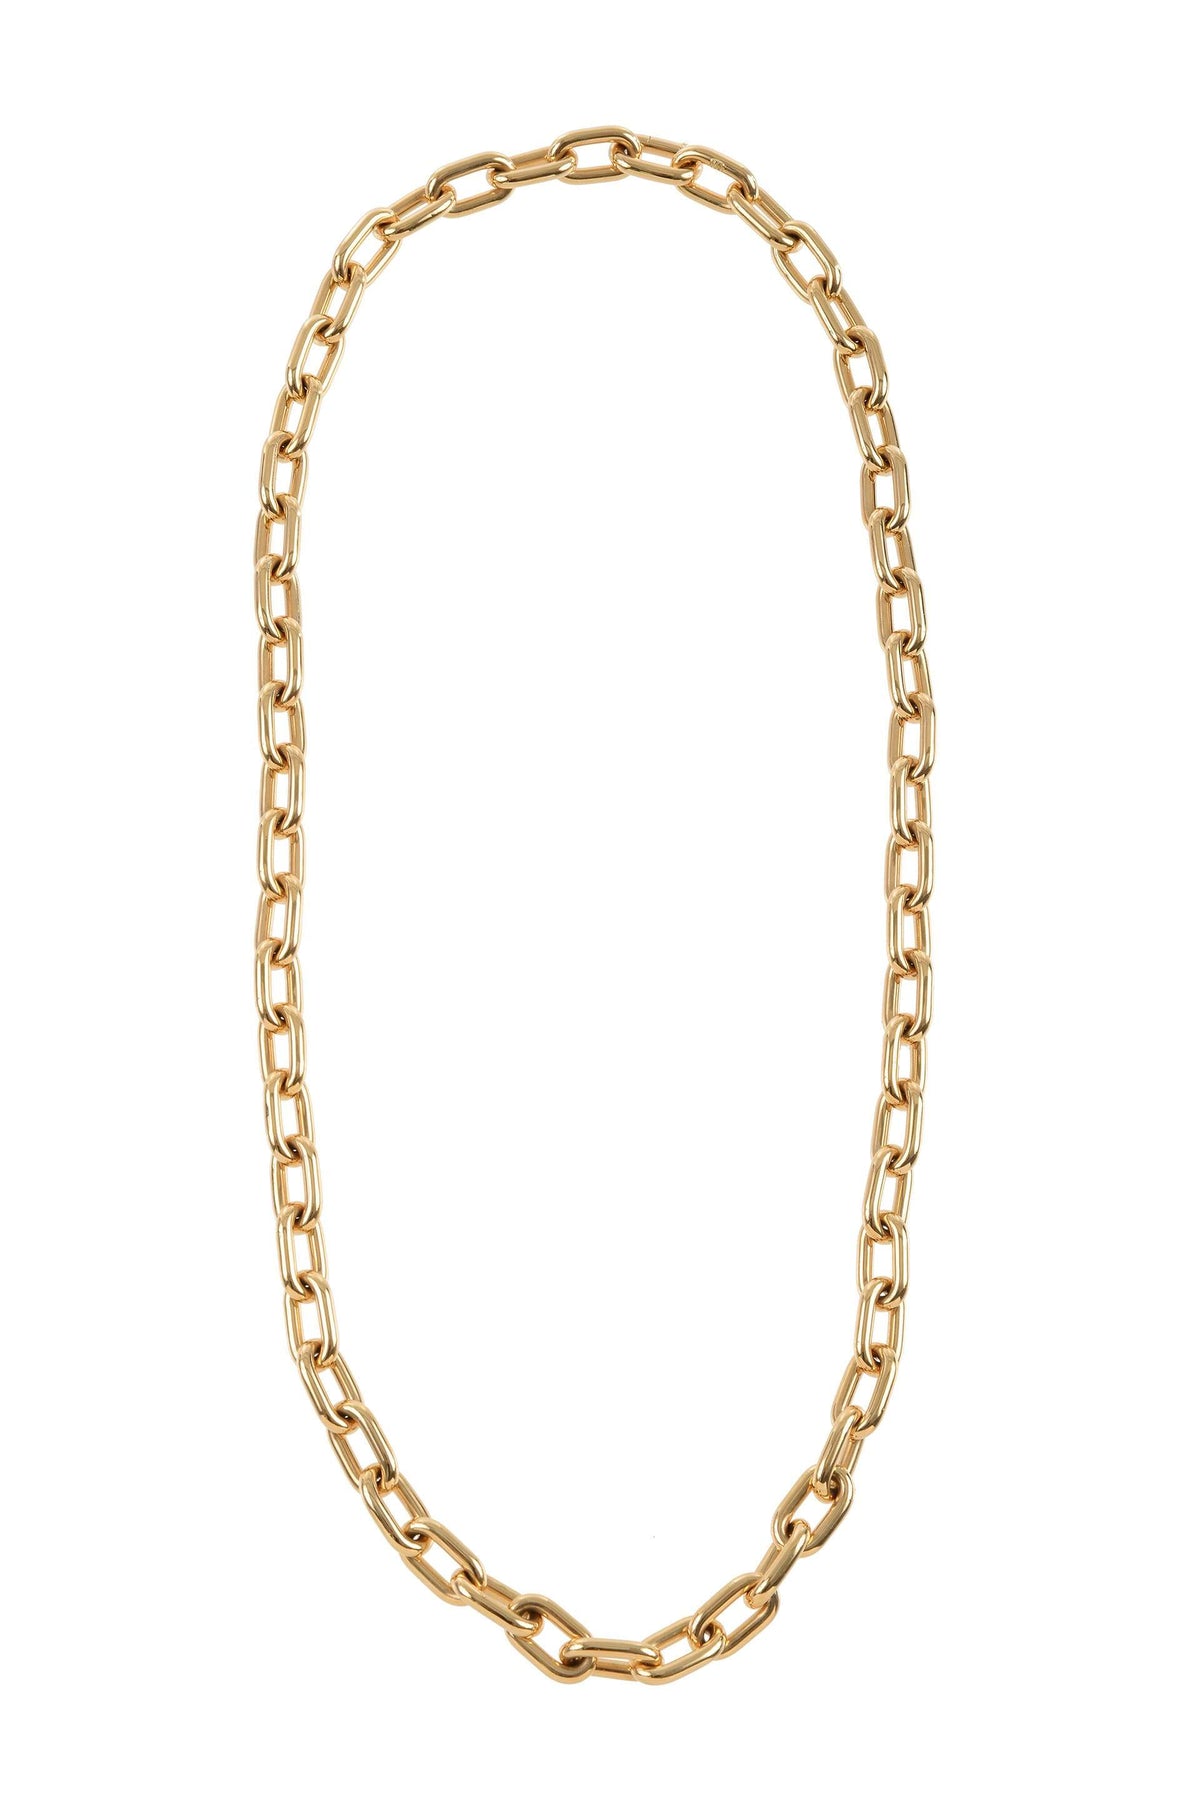 Long Chain Necklace in 18K Gold